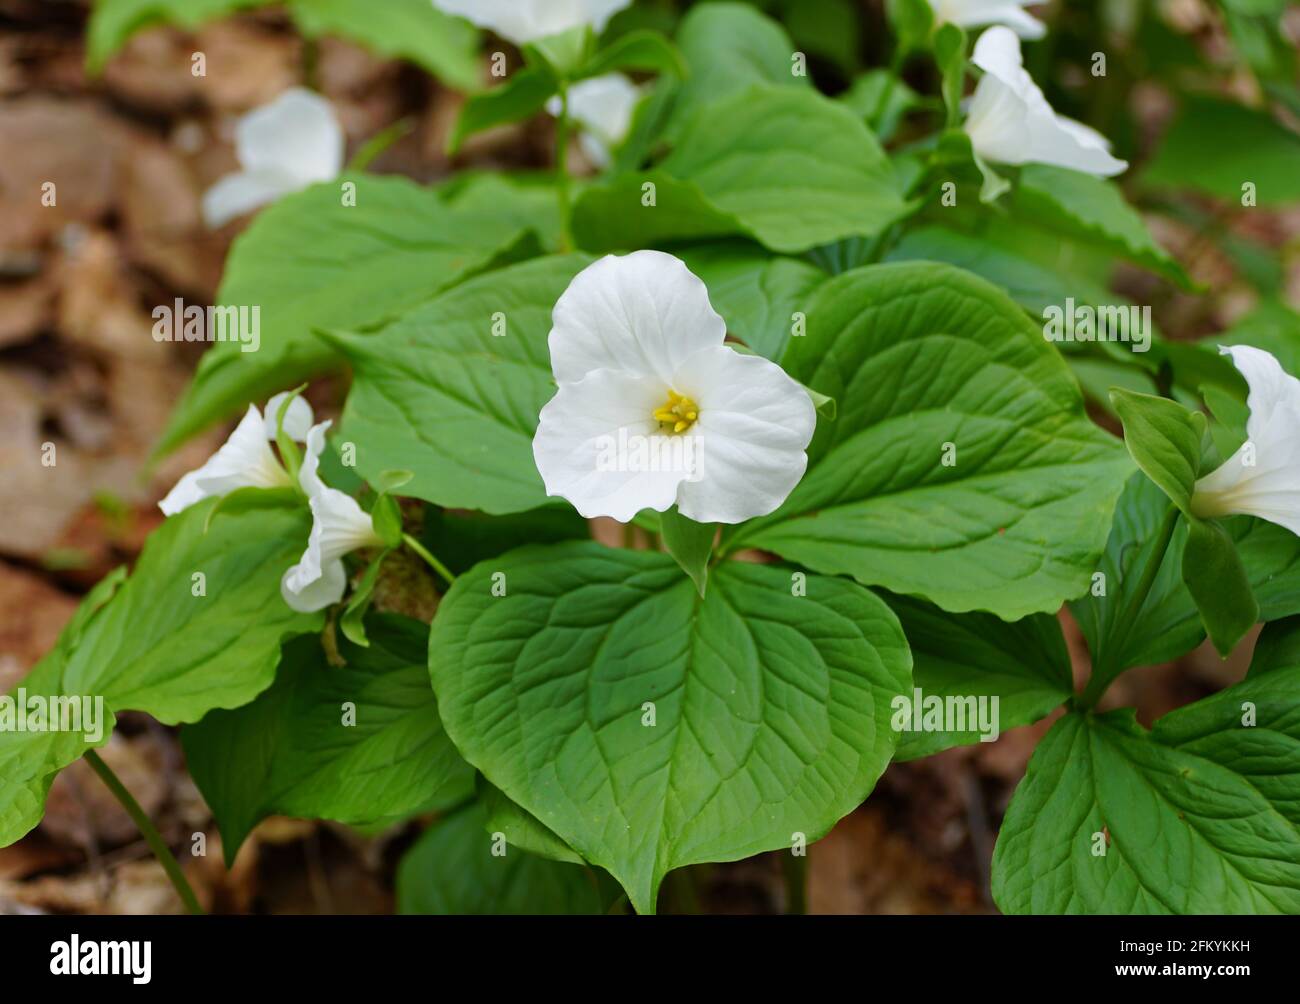 The white Showy Trillium flower at full bloom in the Spring Stock Photo